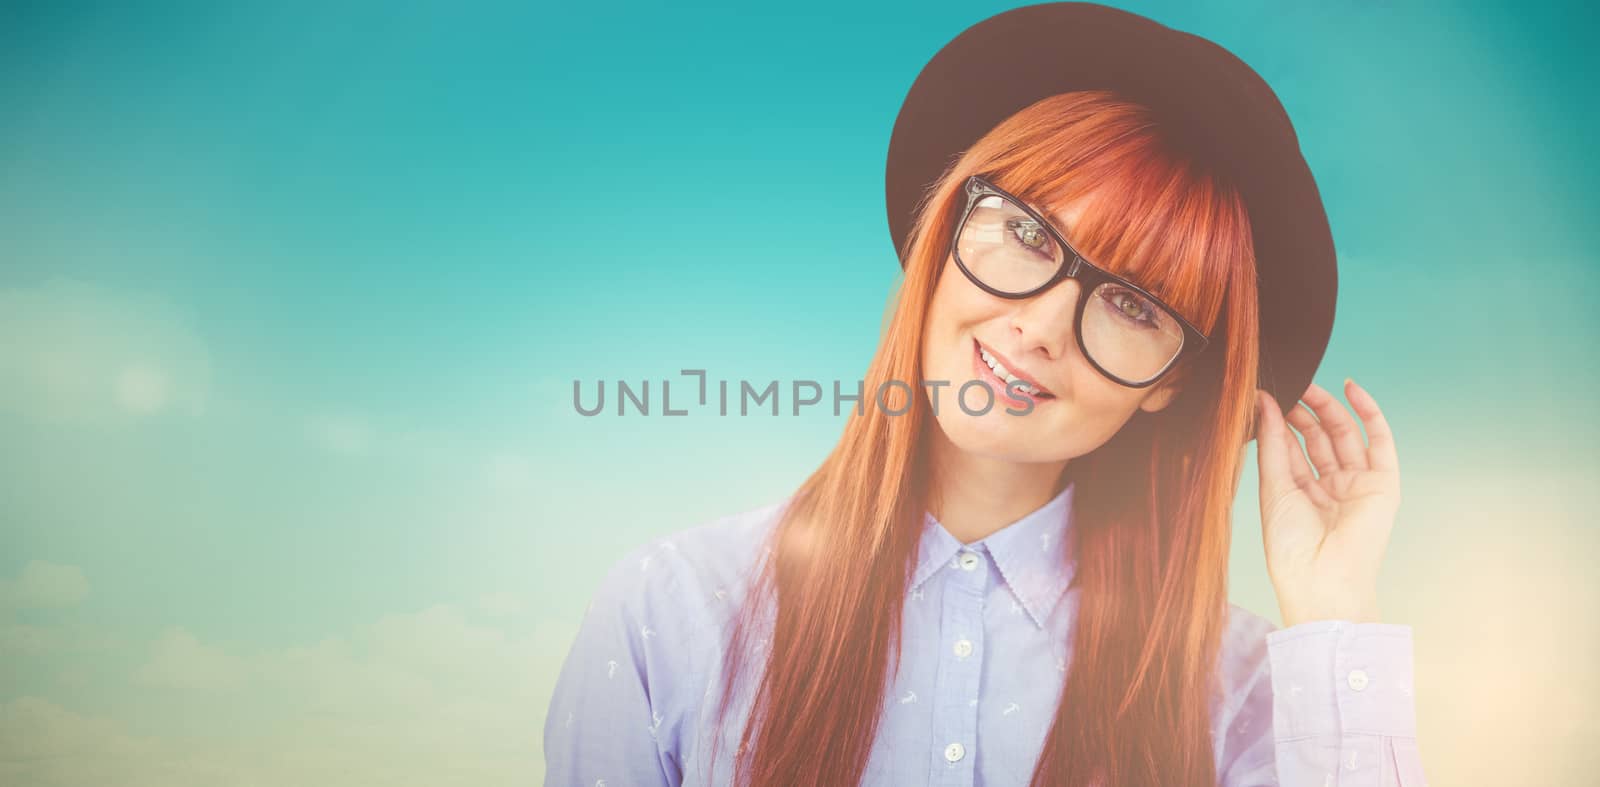 Smiling hipster woman posing face to the camera against blue green background